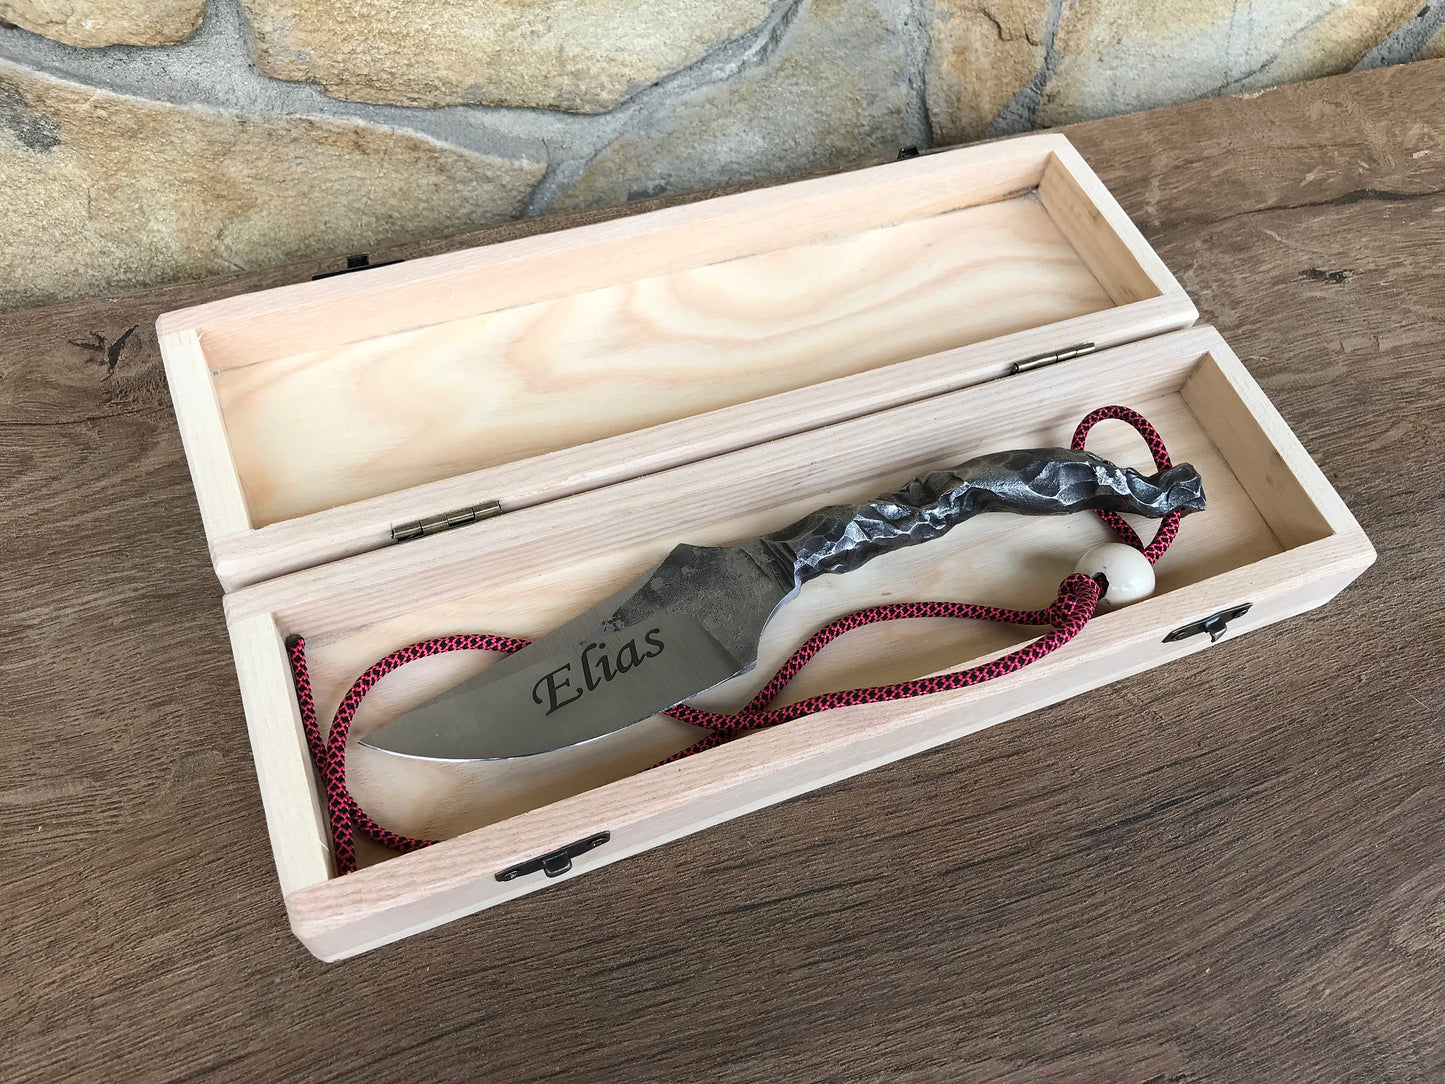 6 year anniversary, gift for husband, knife gift, 6th anniversary,6th anniversary gift for him,iron gift for him,iron gift idea,personalized